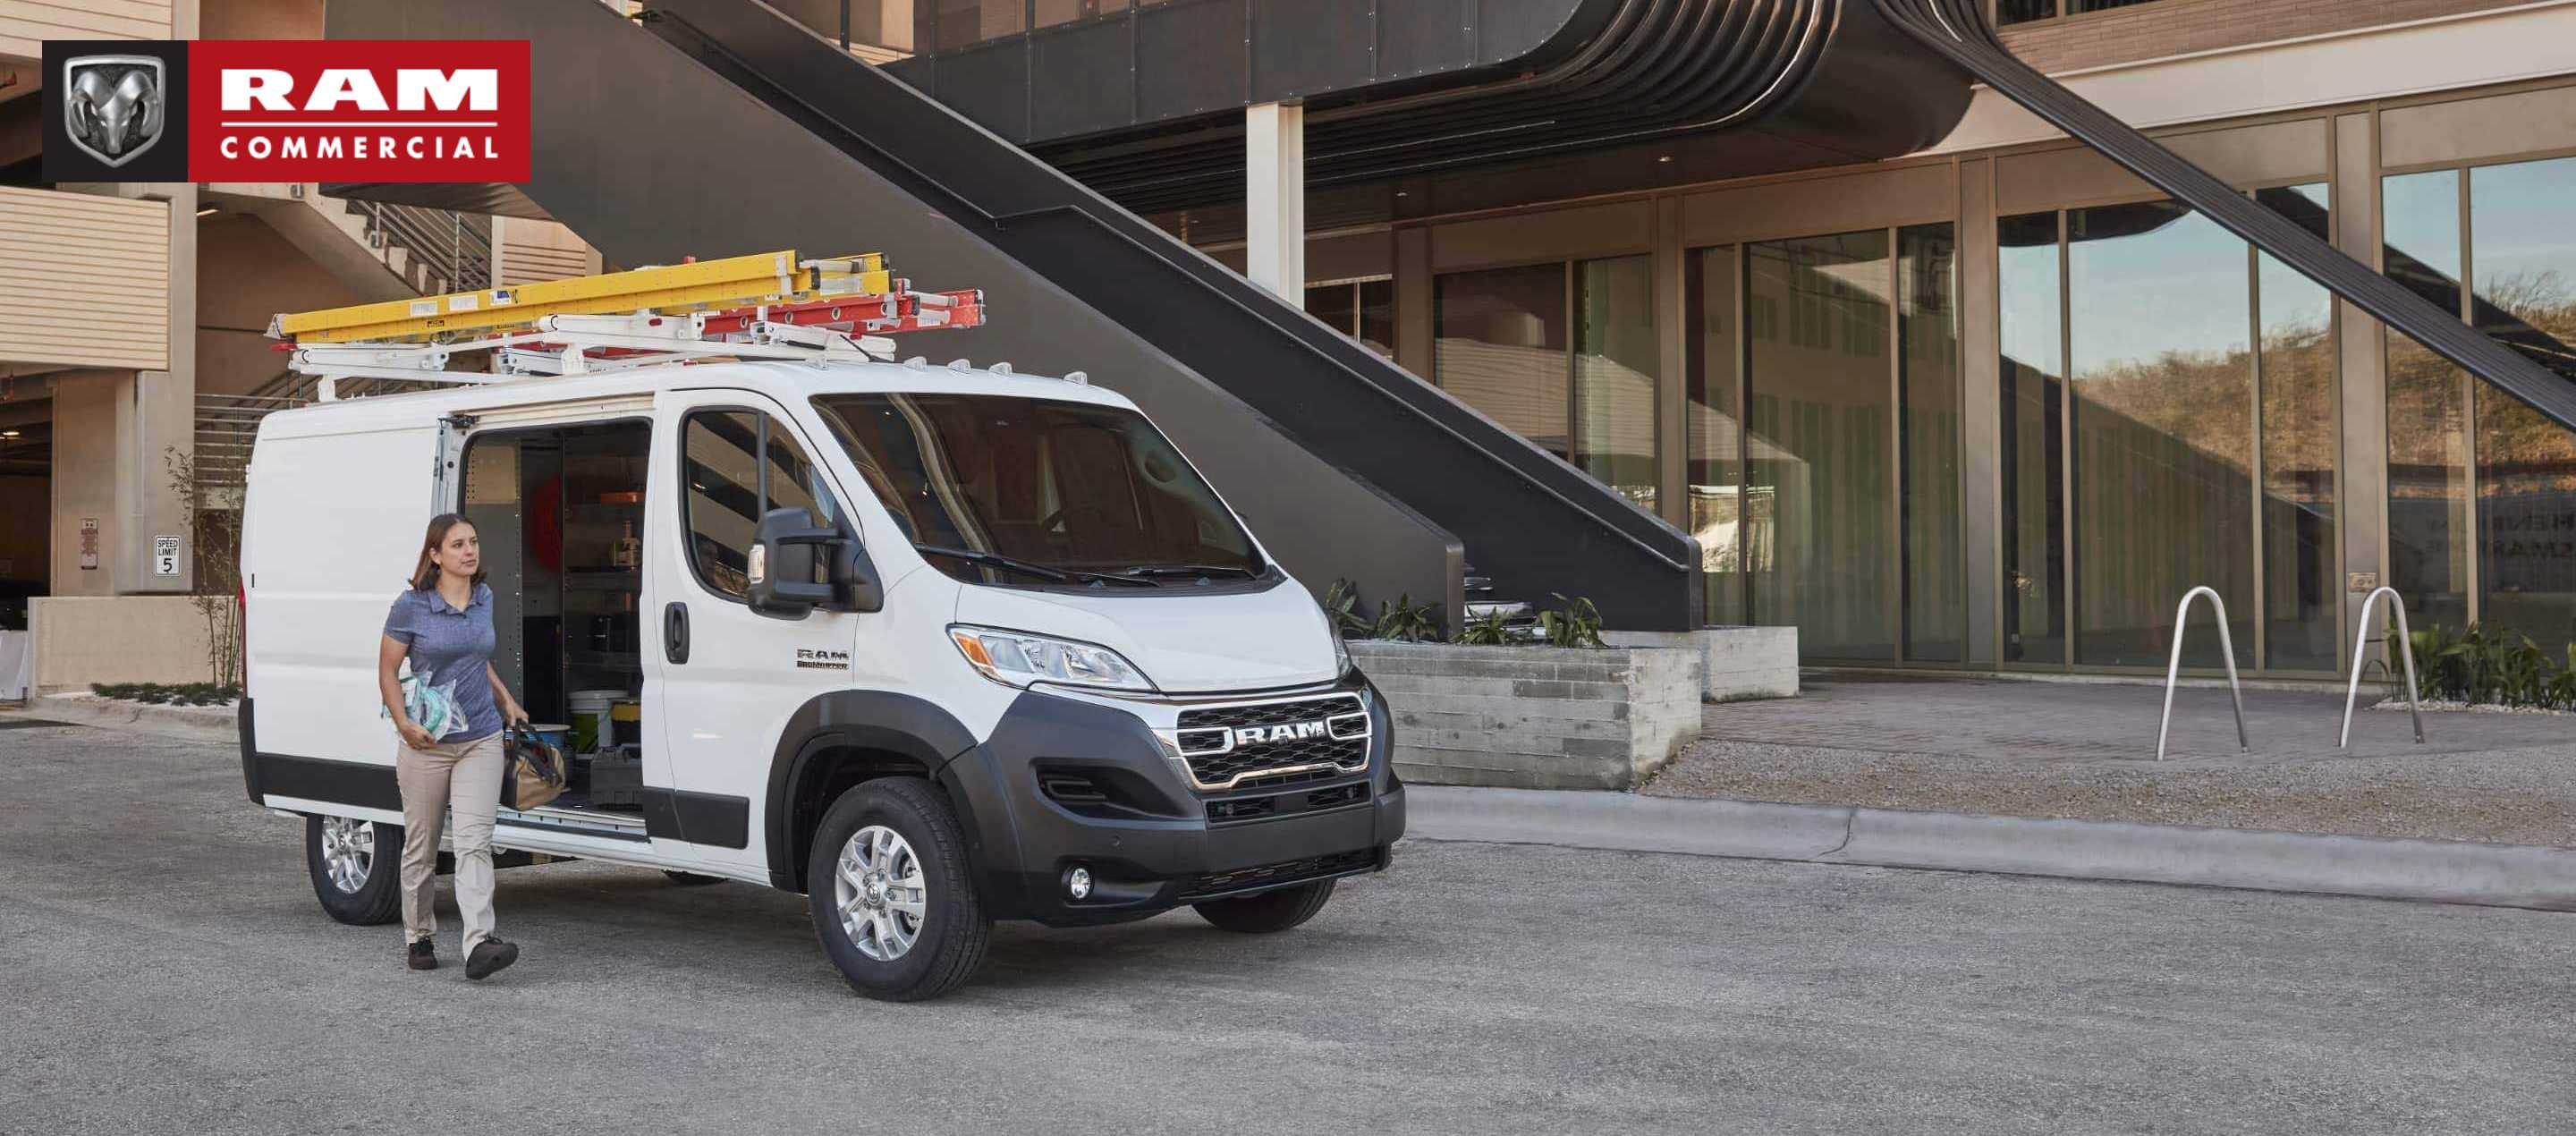  A 2023 Ram ProMaster Low Roof Cargo Van with ladders attached to its roof rack, parked beside a commercial building with its side door open and a woman carrying tools outside the vehicle. Ram Commercial.